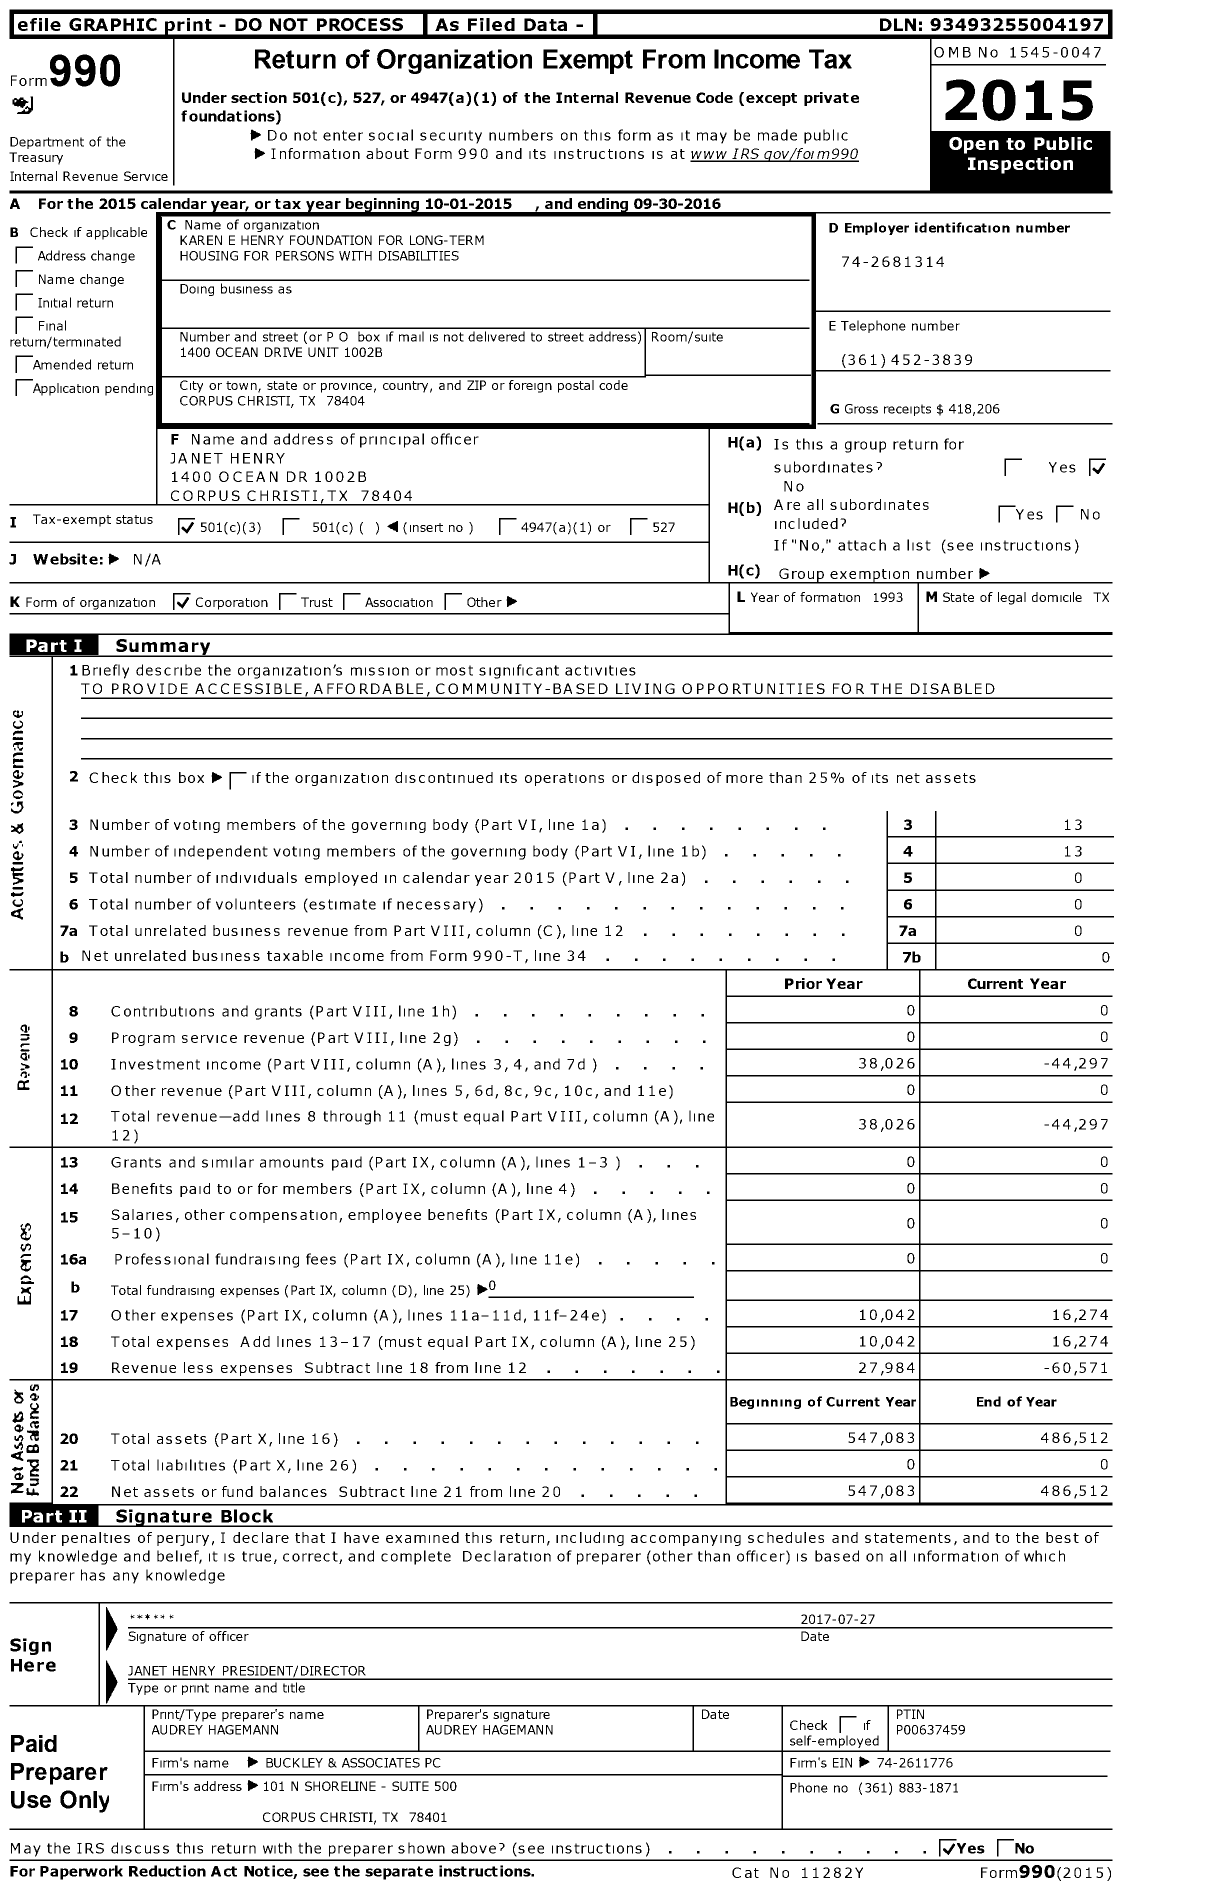 Image of first page of 2015 Form 990 for Karen E Henry Foundation for Long-Term Housing for Persons with Disabilities